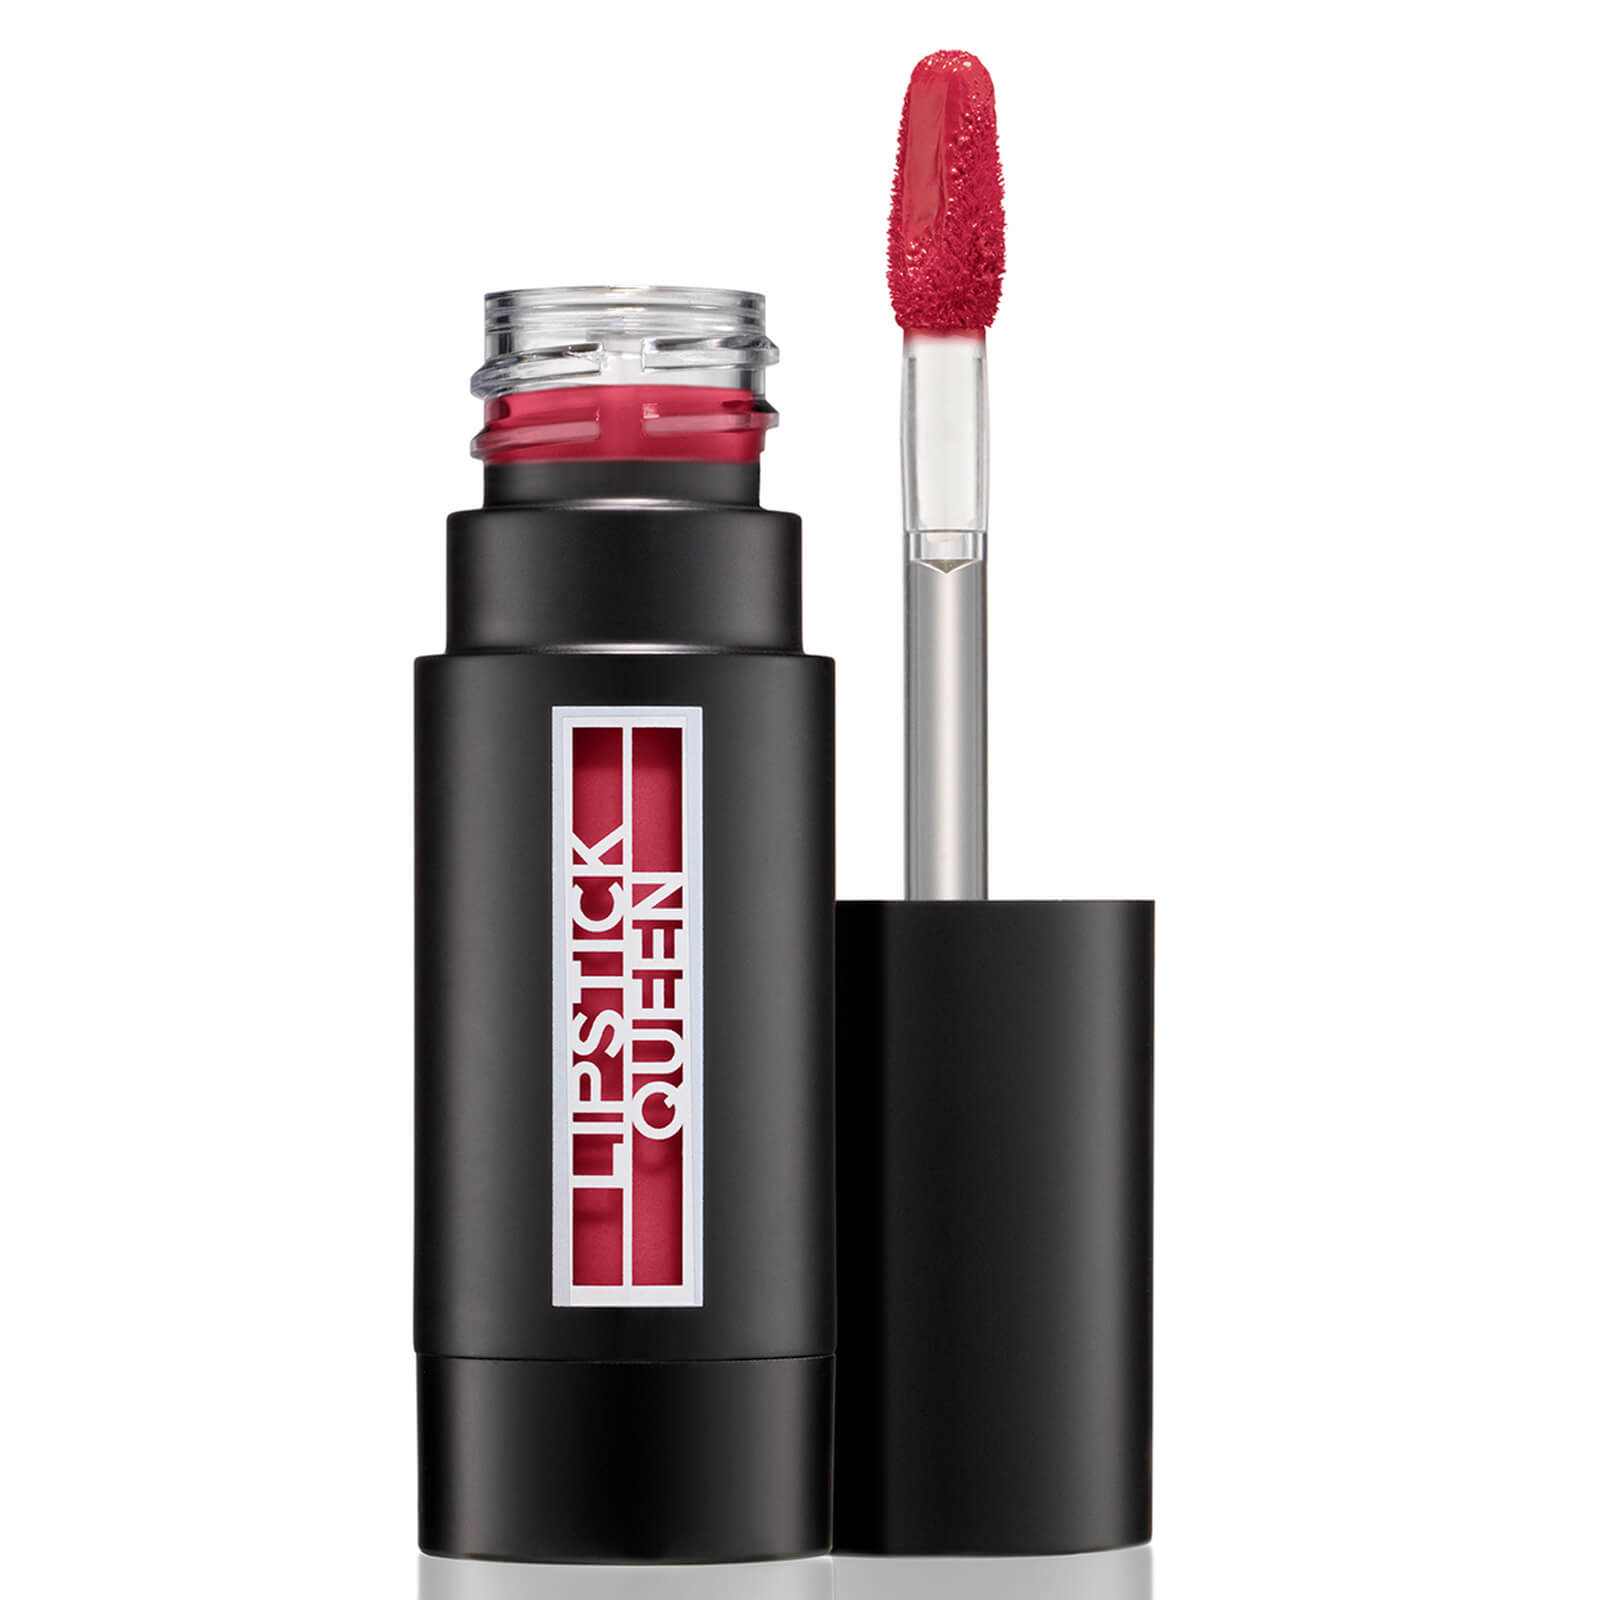 Lipstick Queen Lipdulgence Lip Mousse 2.5ml (Various Shades) - Cherry on Top